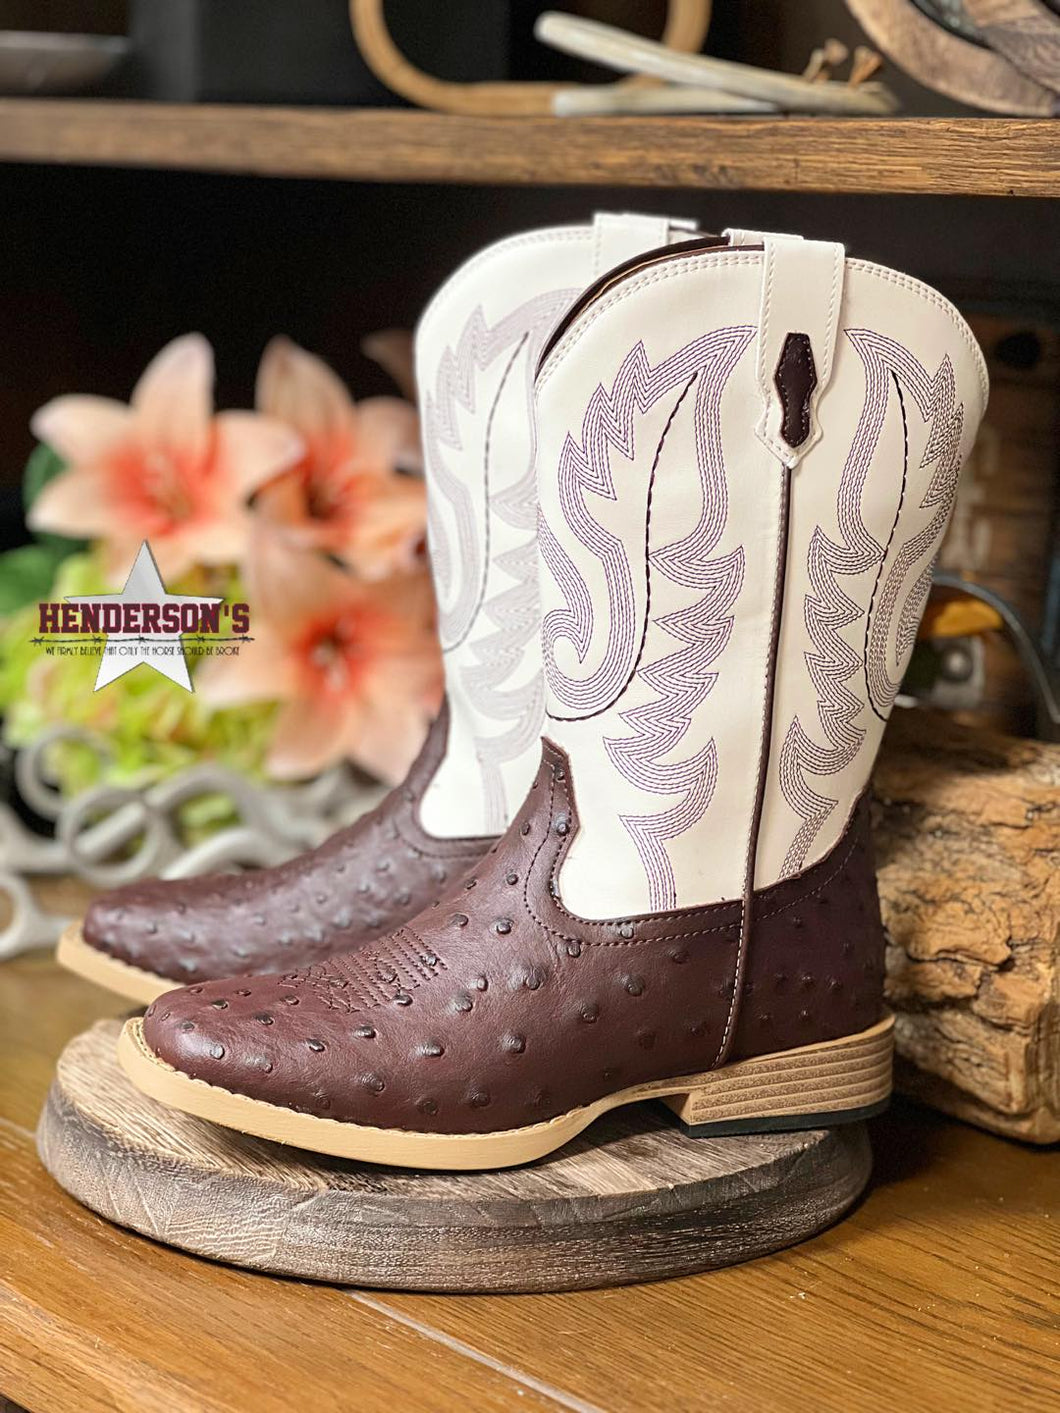 Bumps Boots by Roper - Henderson's Western Store